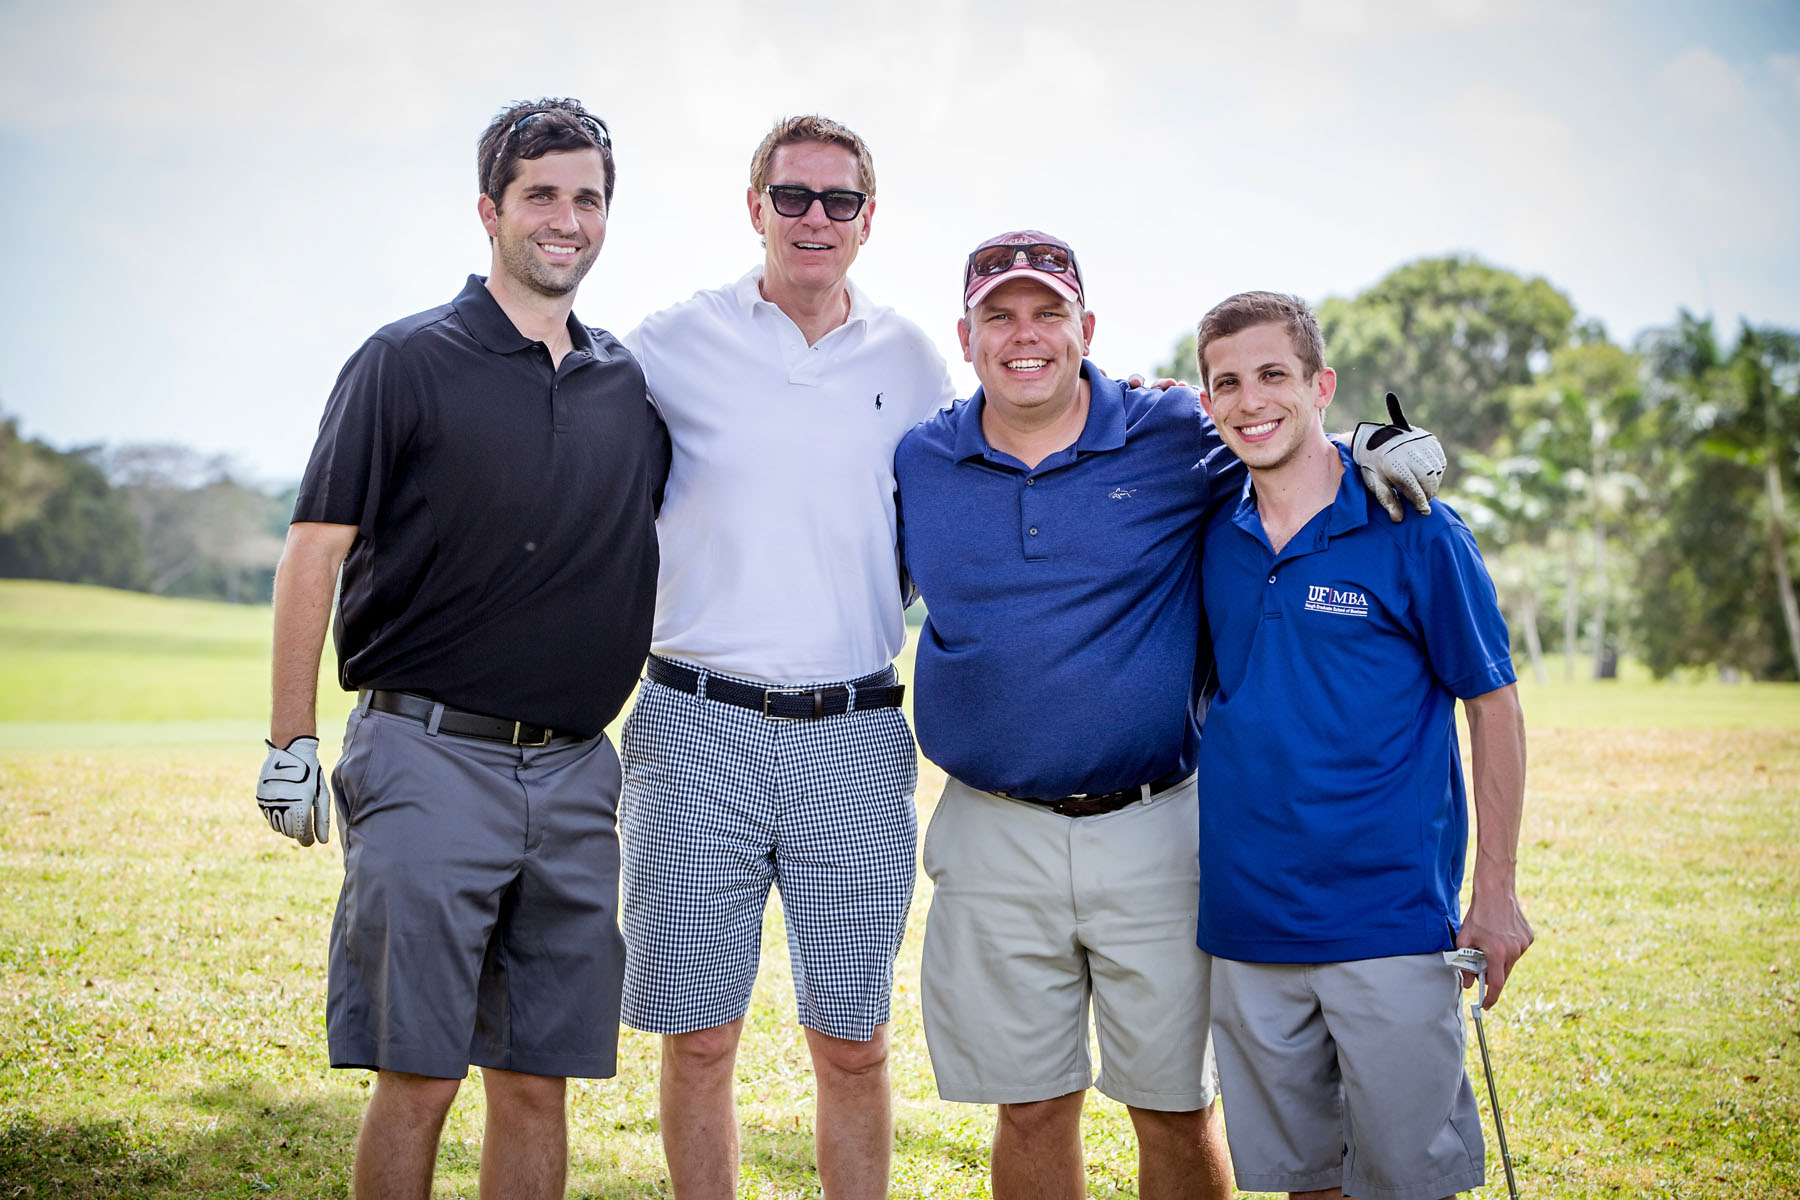 Kirk Chewning (second from right), co-CEO of Cane Bay Partners VI and vice chair of the Junior Achievement VI board, poses with teammates during the Junior Achievement Golf Classic Friday at Carambola